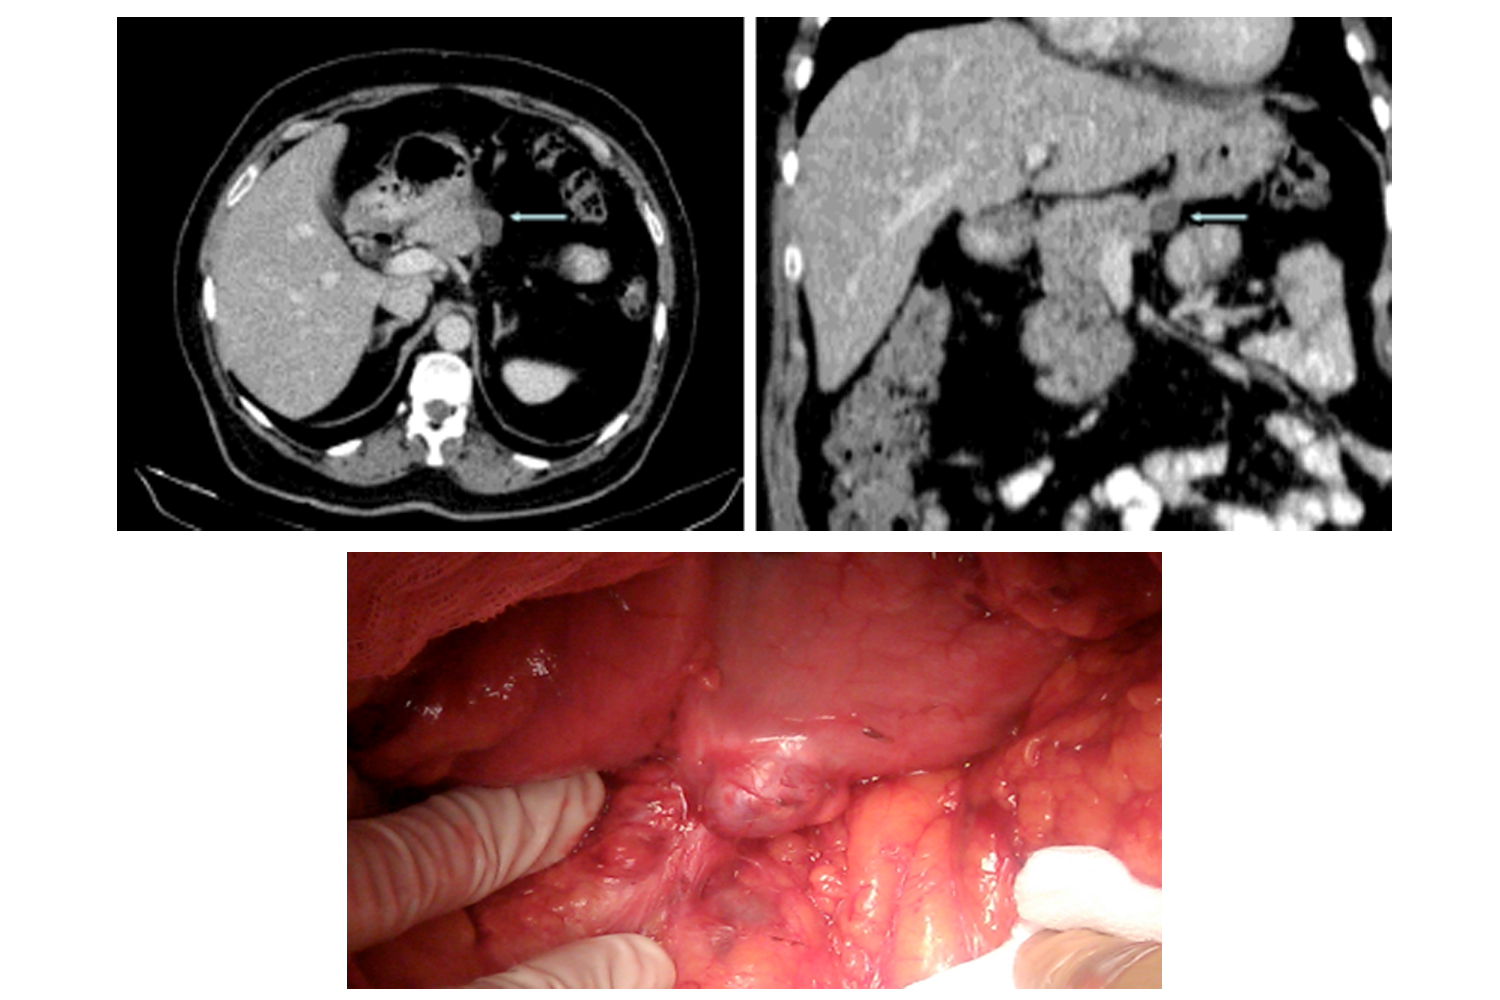 Gastric Cyst Suspected of Relapse of Mucinous Cystic Tumor of the Pancreas